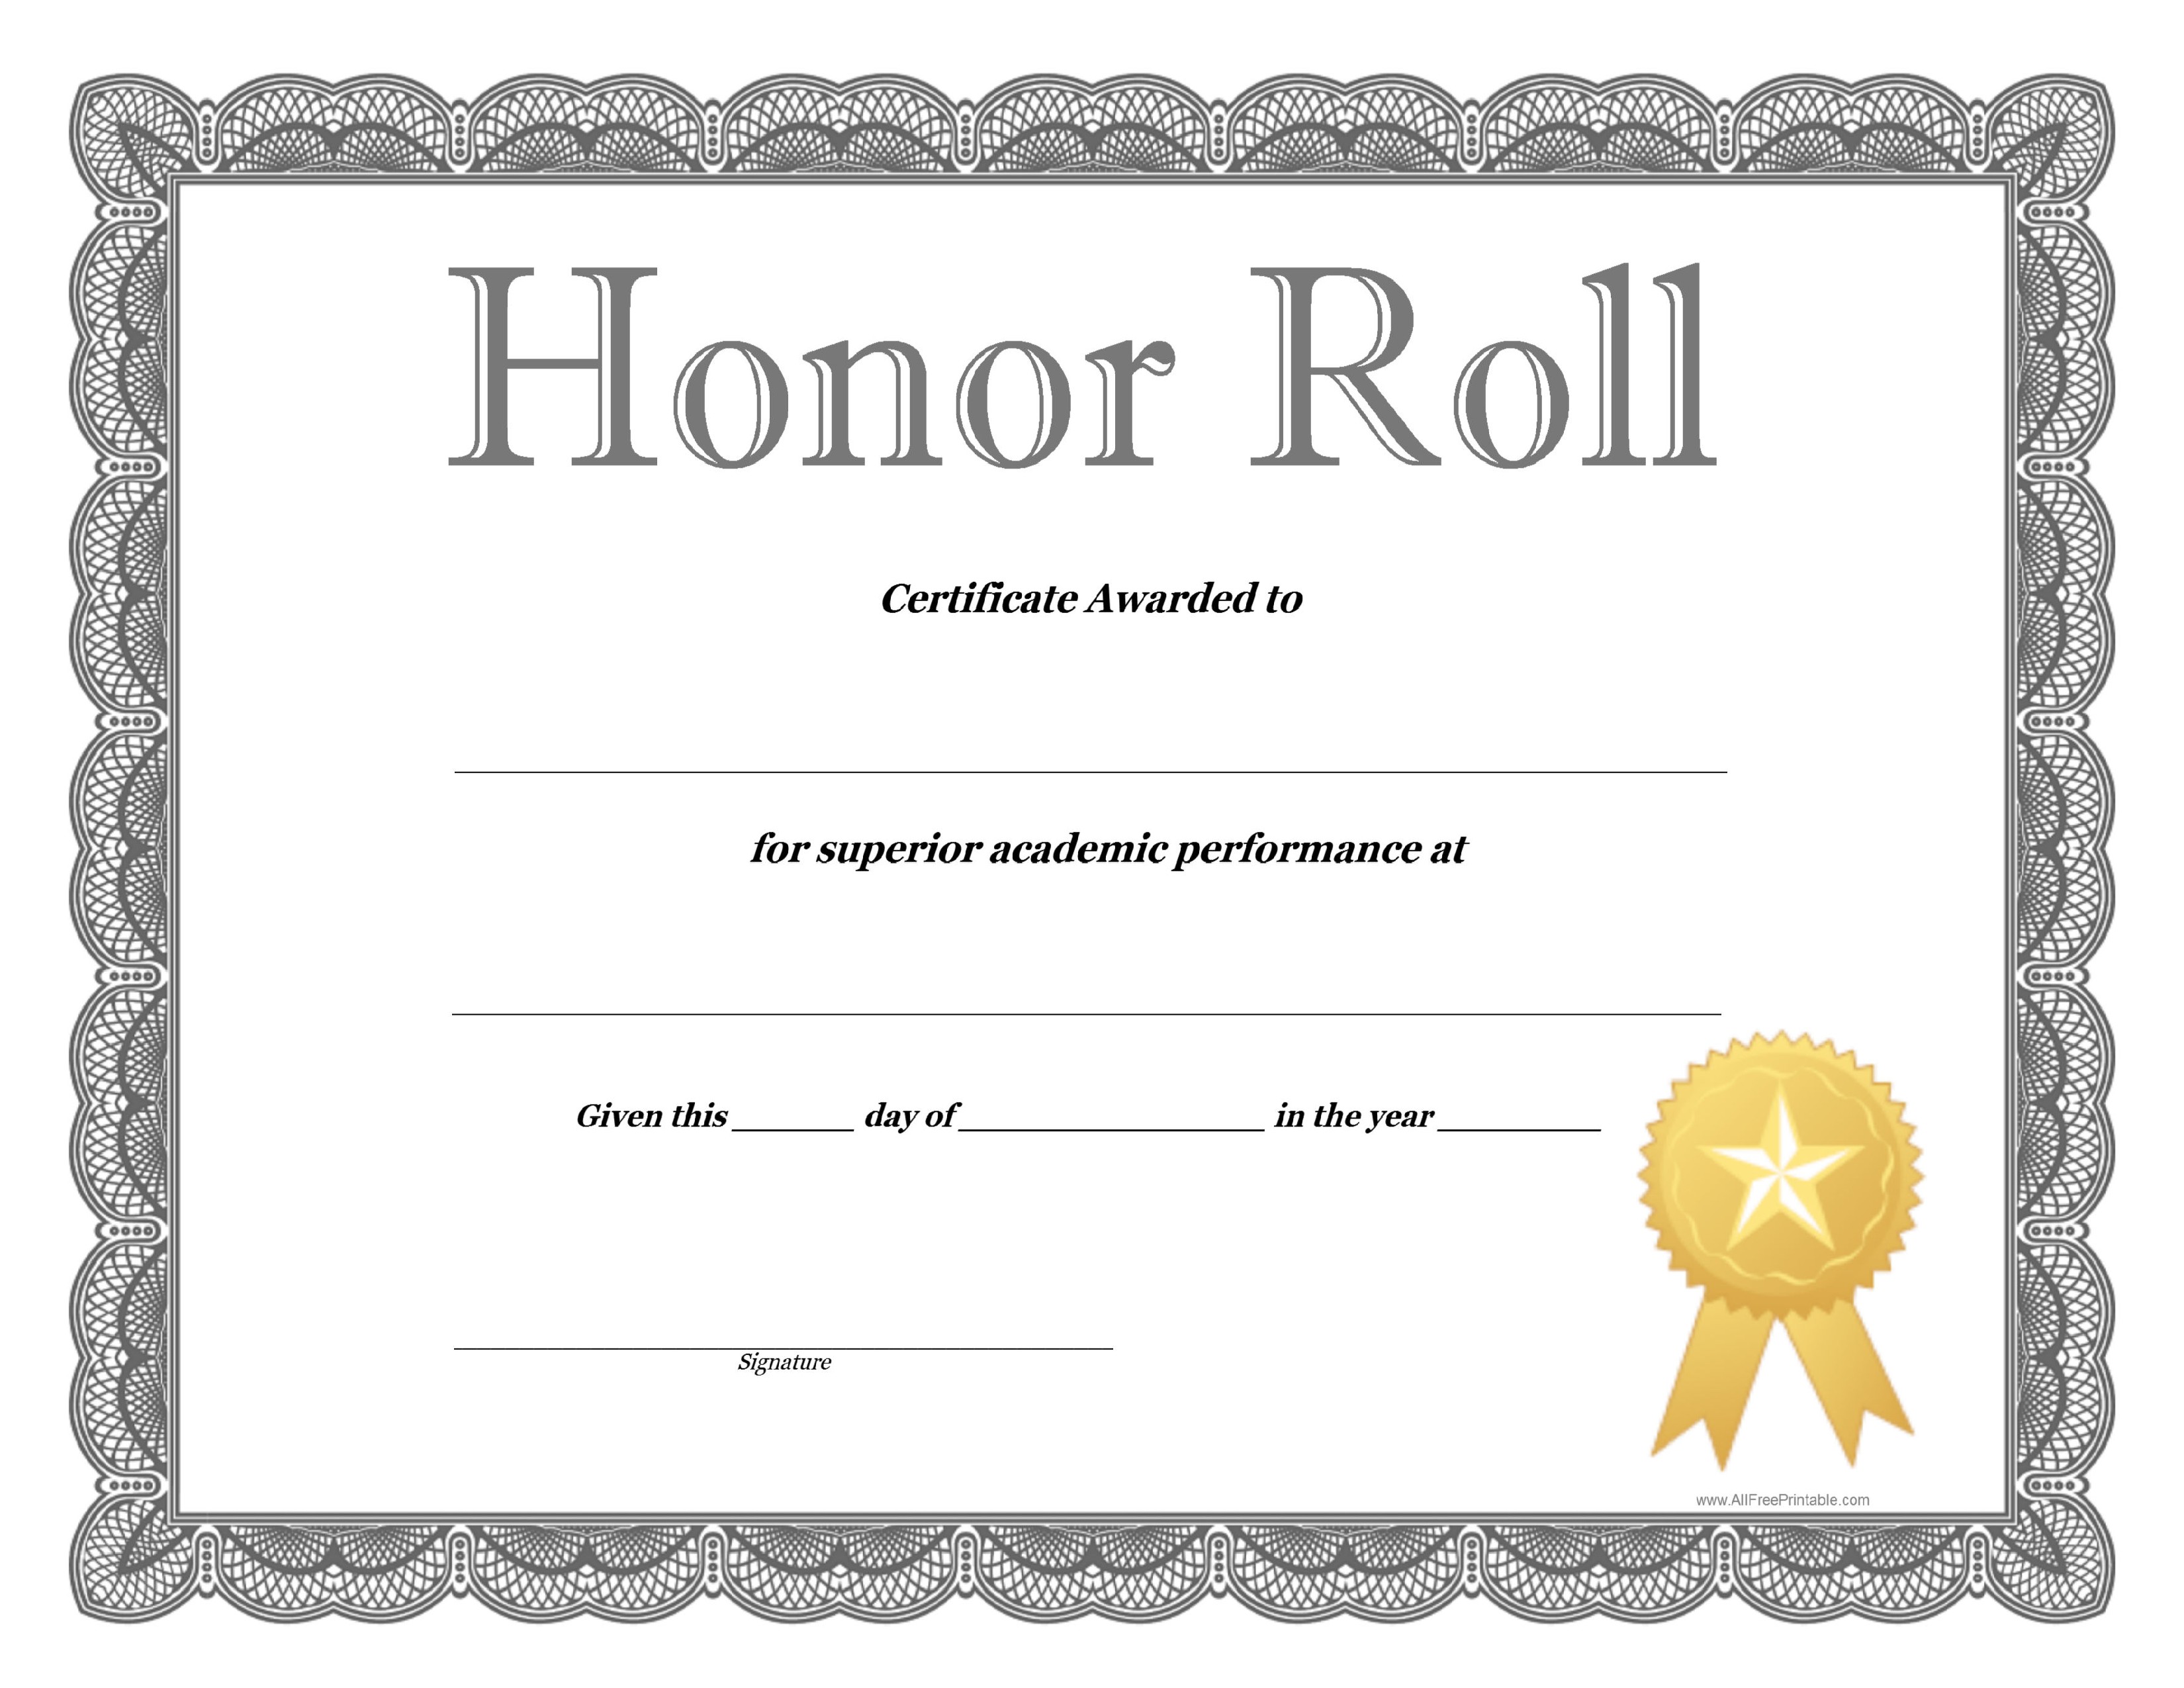 Honor Roll Certificate Template How To Craft A Professional